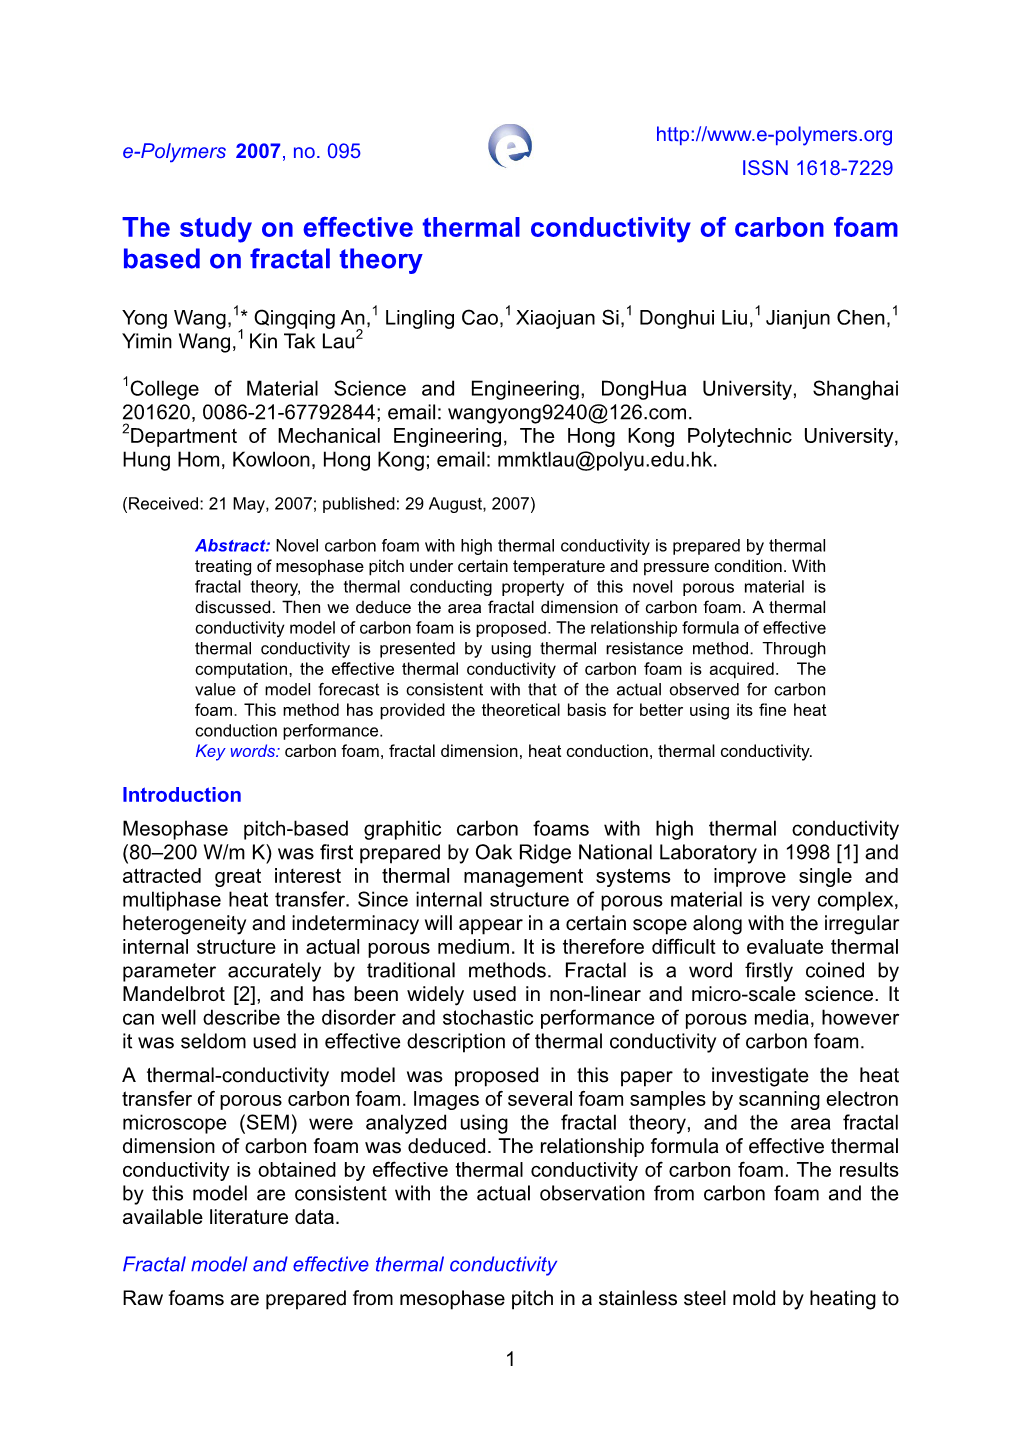 The Study on Effective Thermal Conductivity of Carbon Foam Based on Fractal Theory